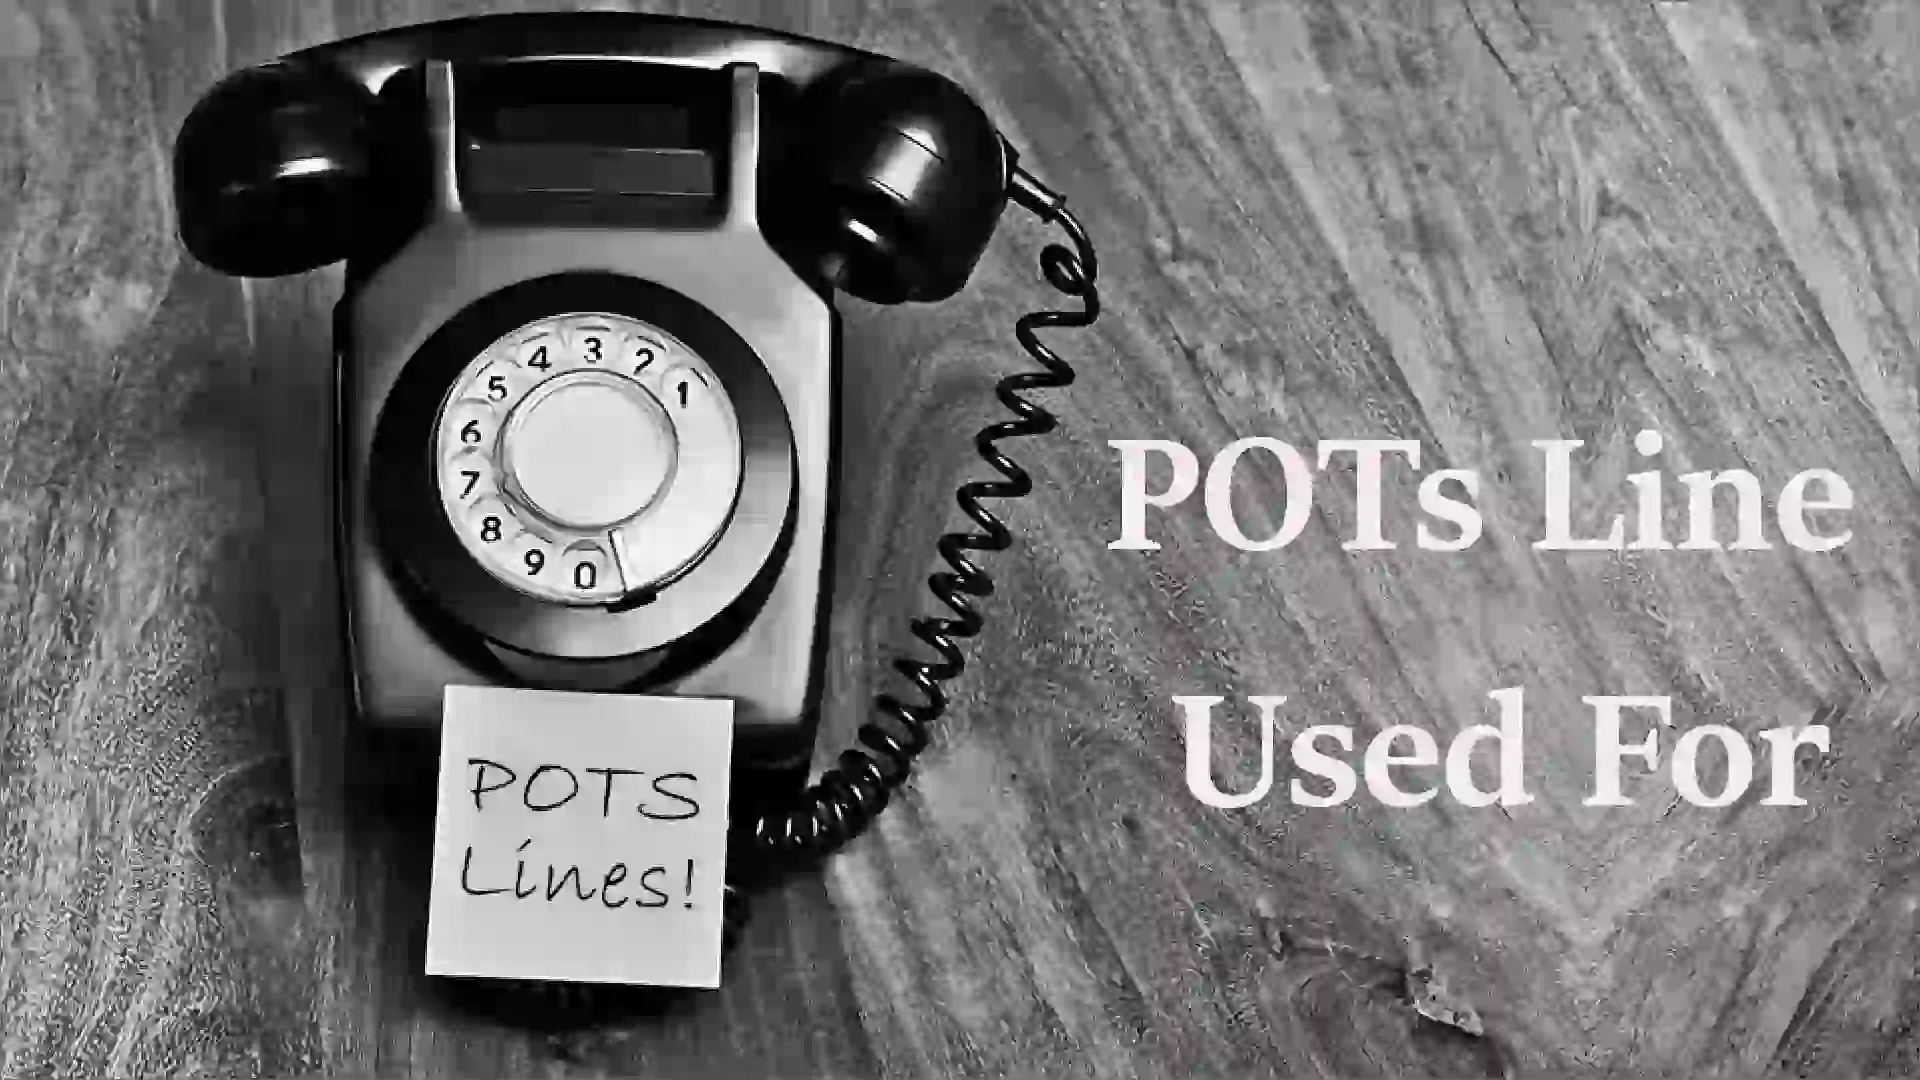 POTS Line Used for